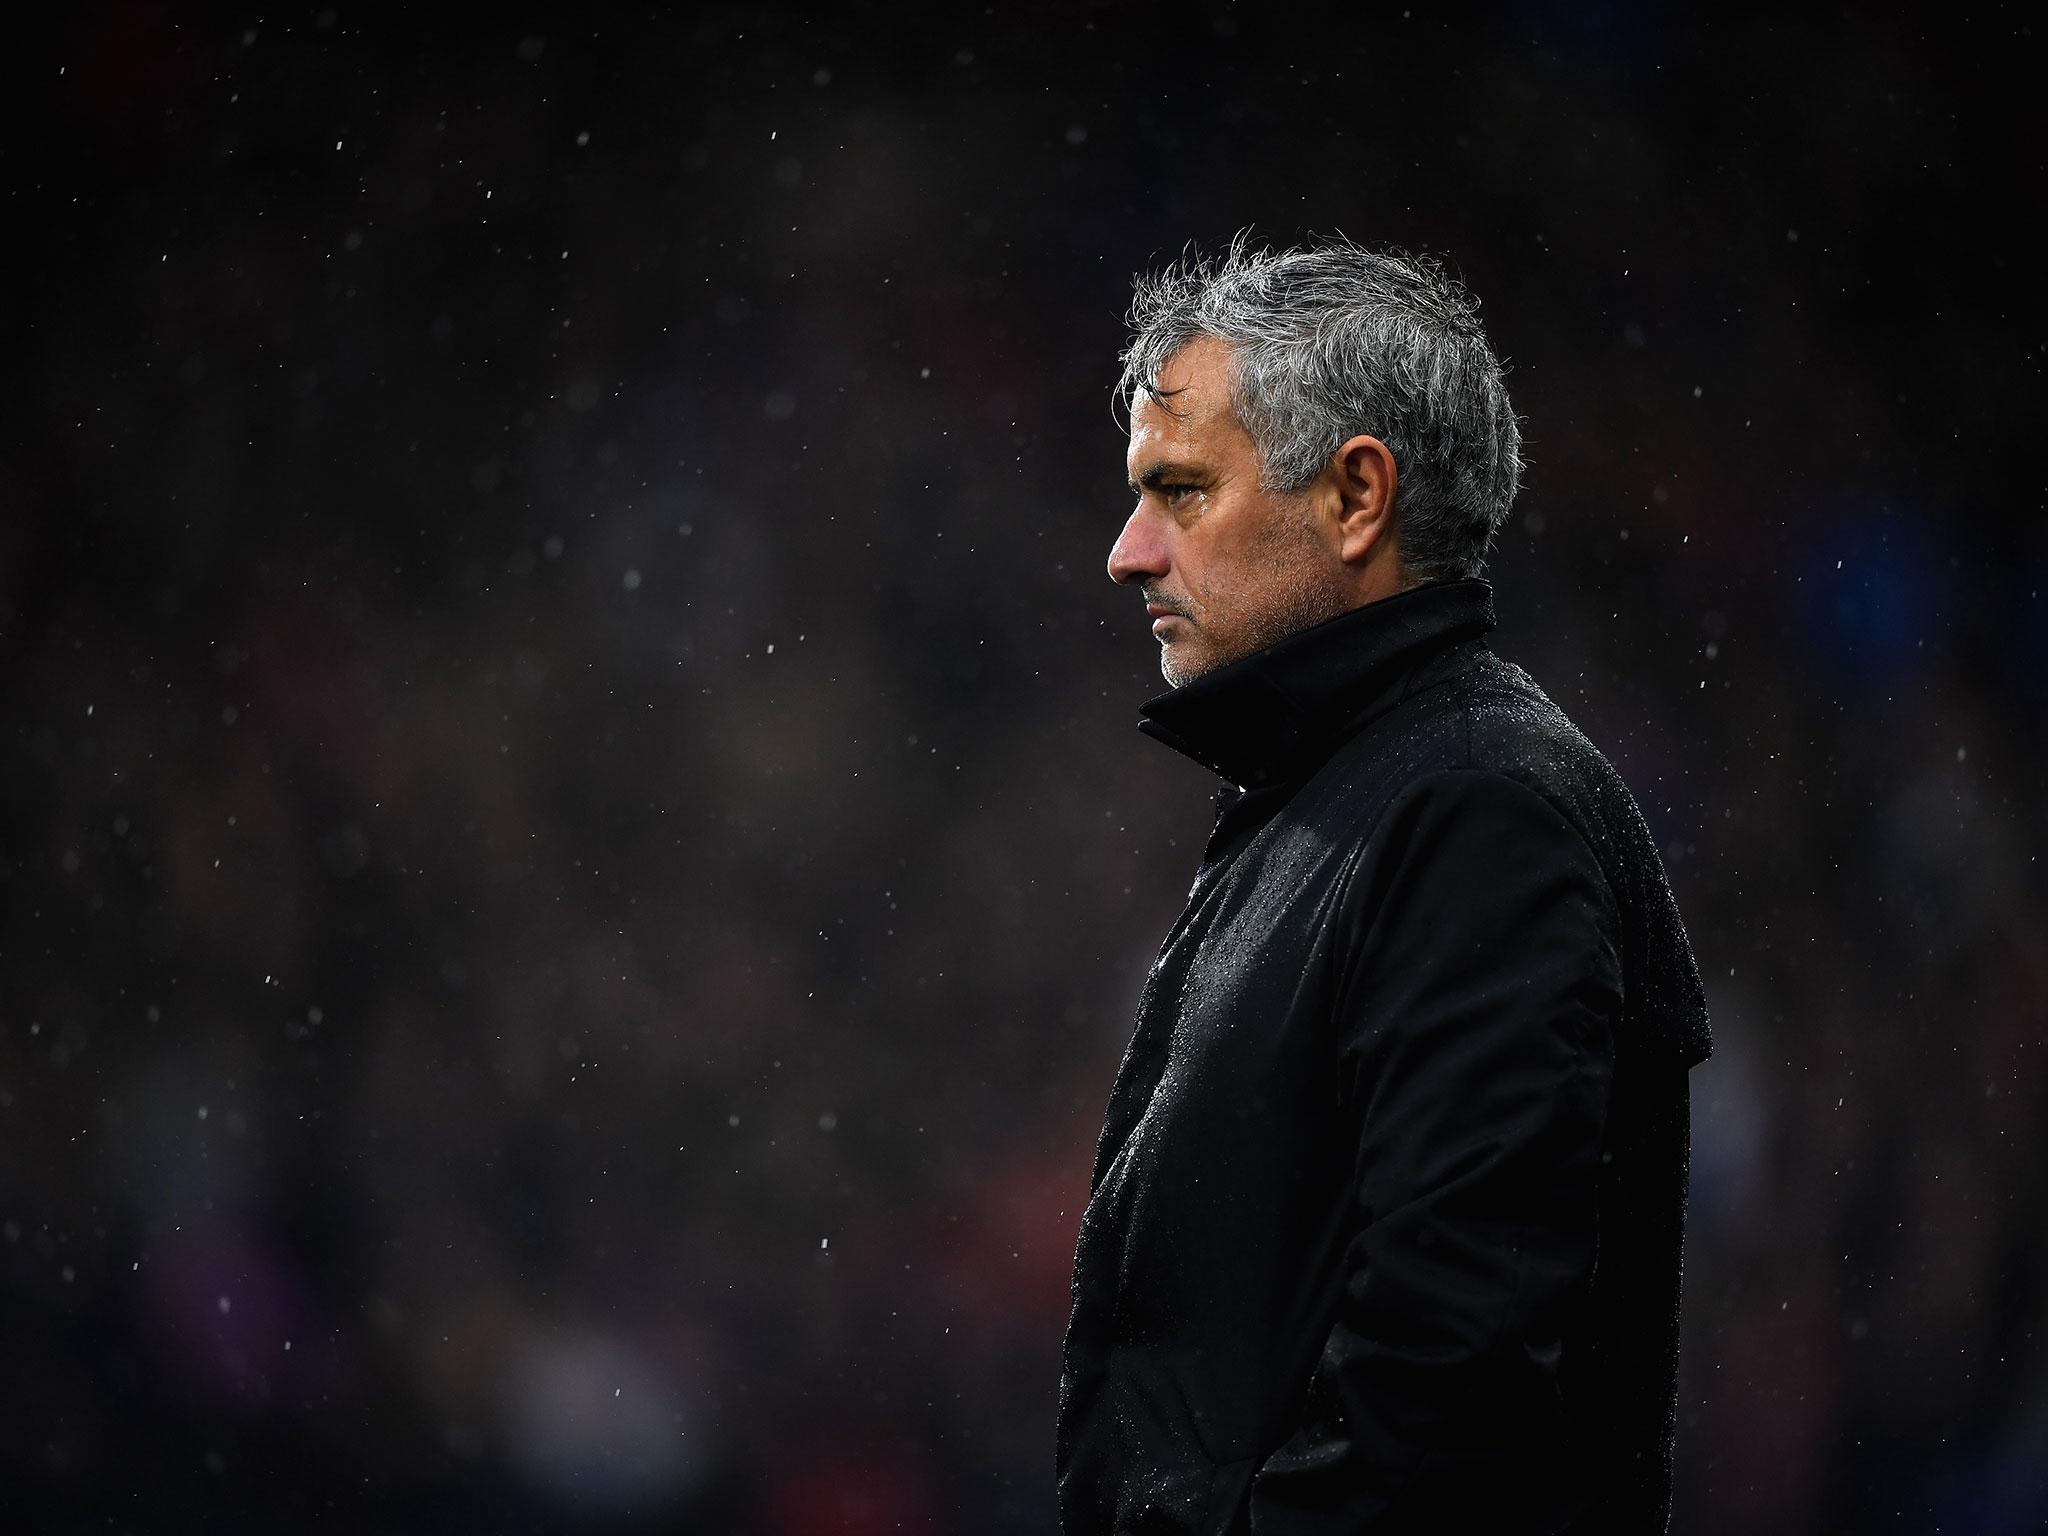 &#13;
Mourinho was disappointed with his team's performance at Huddersfield (Getty)&#13;